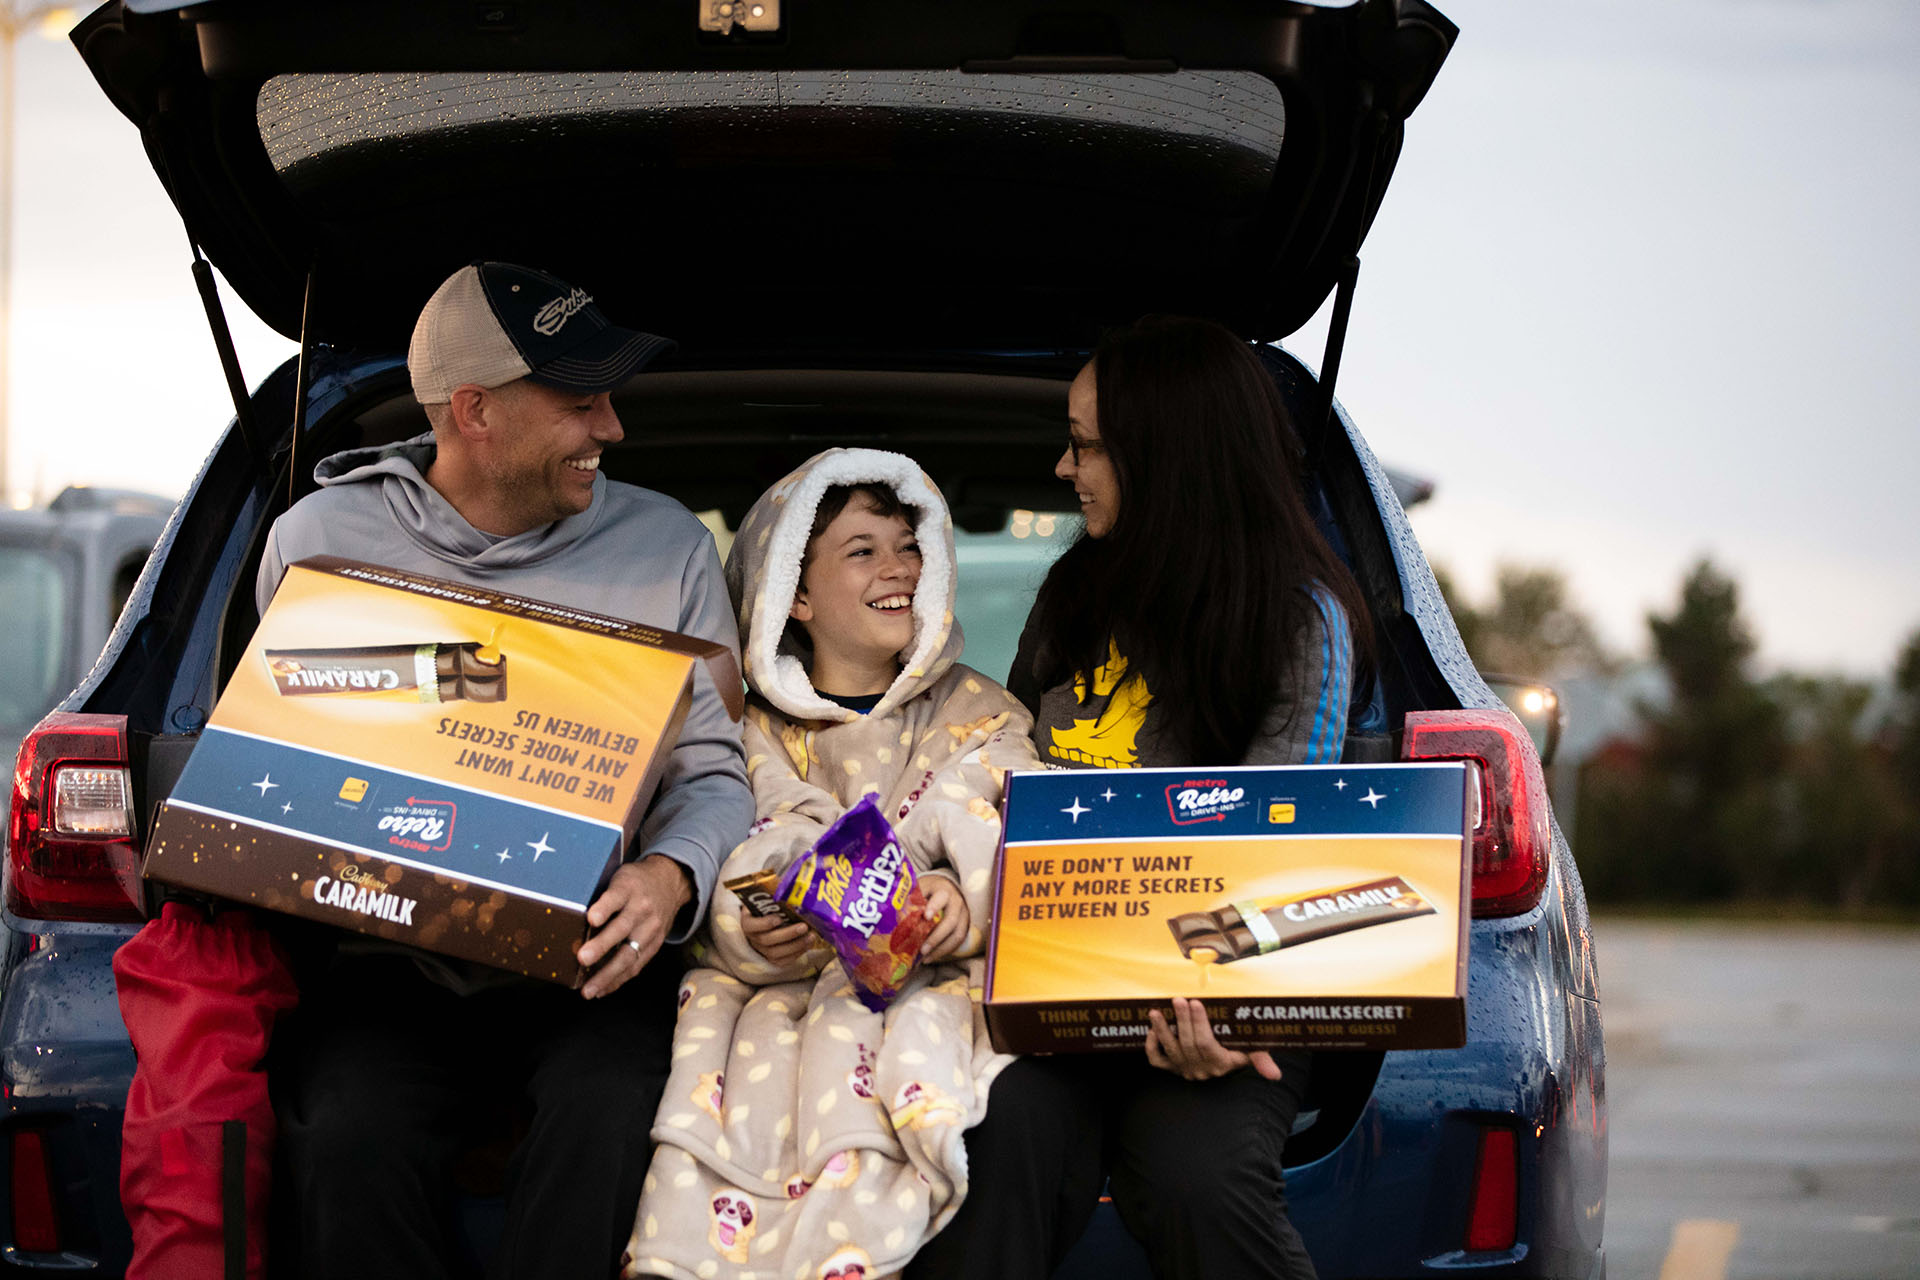 A family sitting in the back of a car holding chocolate samples